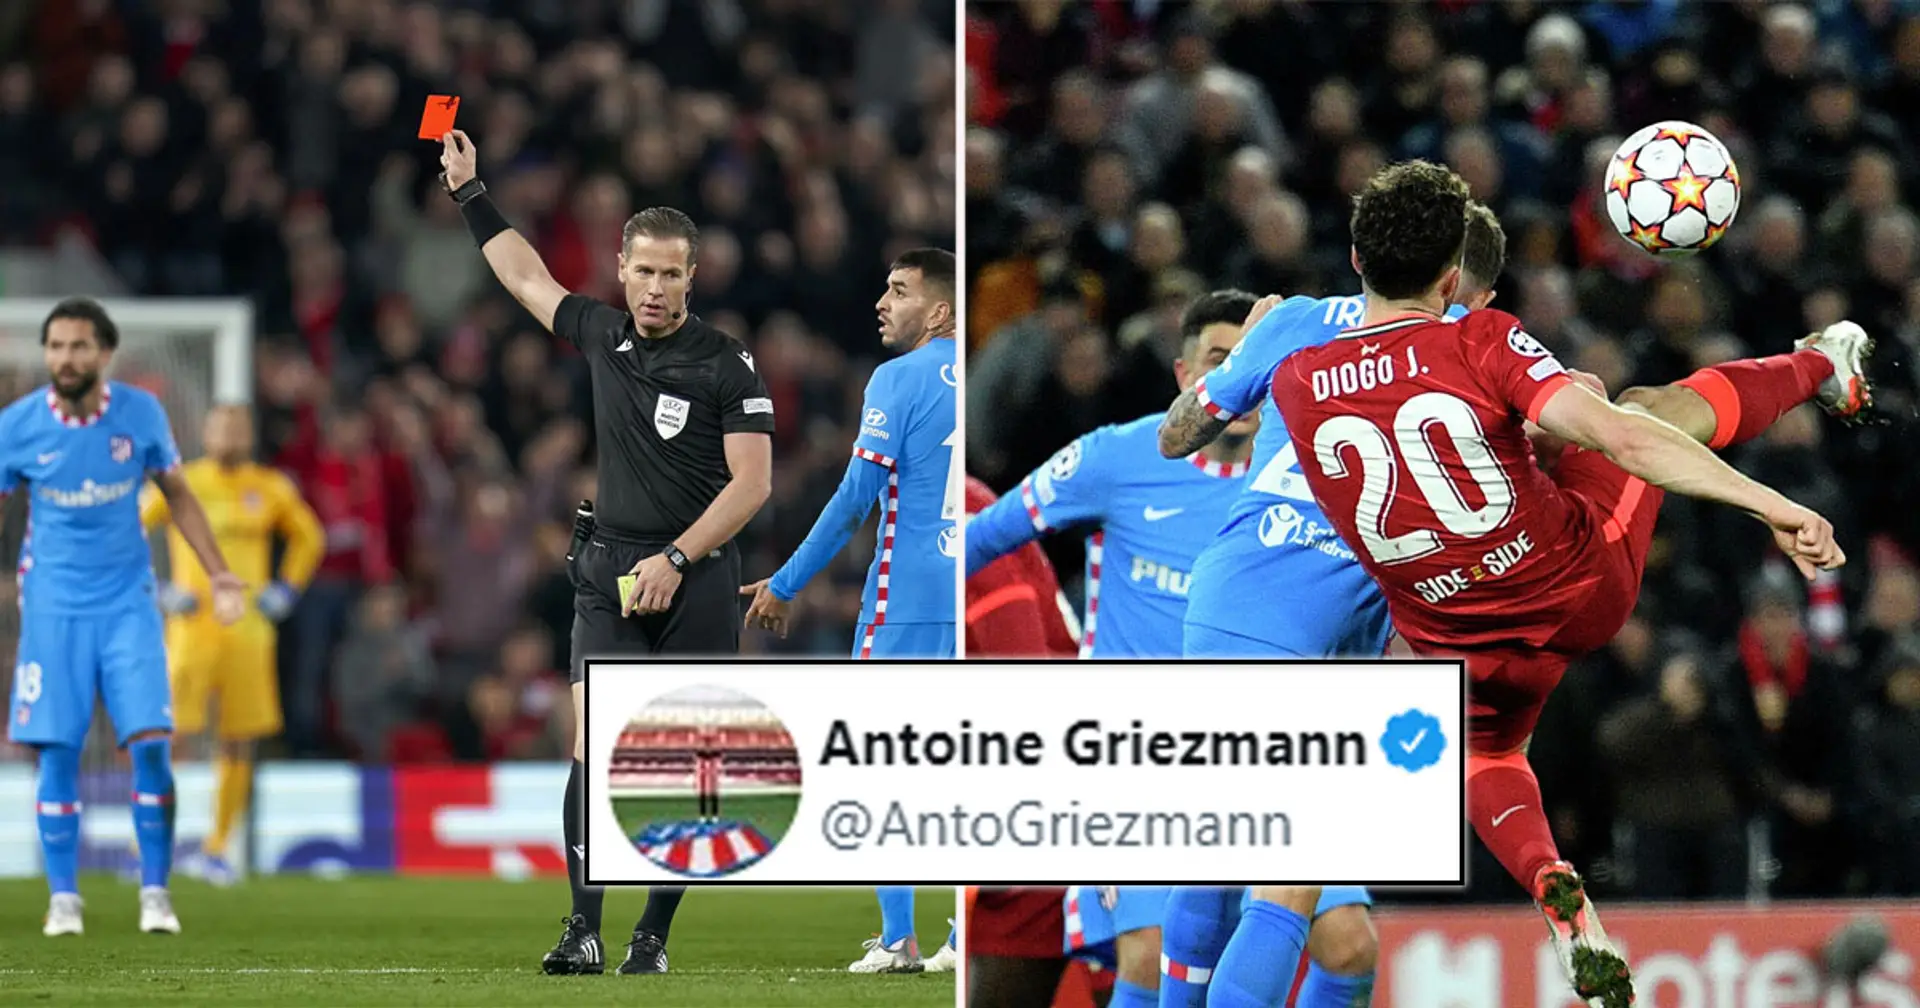 Antoine Griezmann slams referee decisions in Atletico Madrid's loss to Liverpool